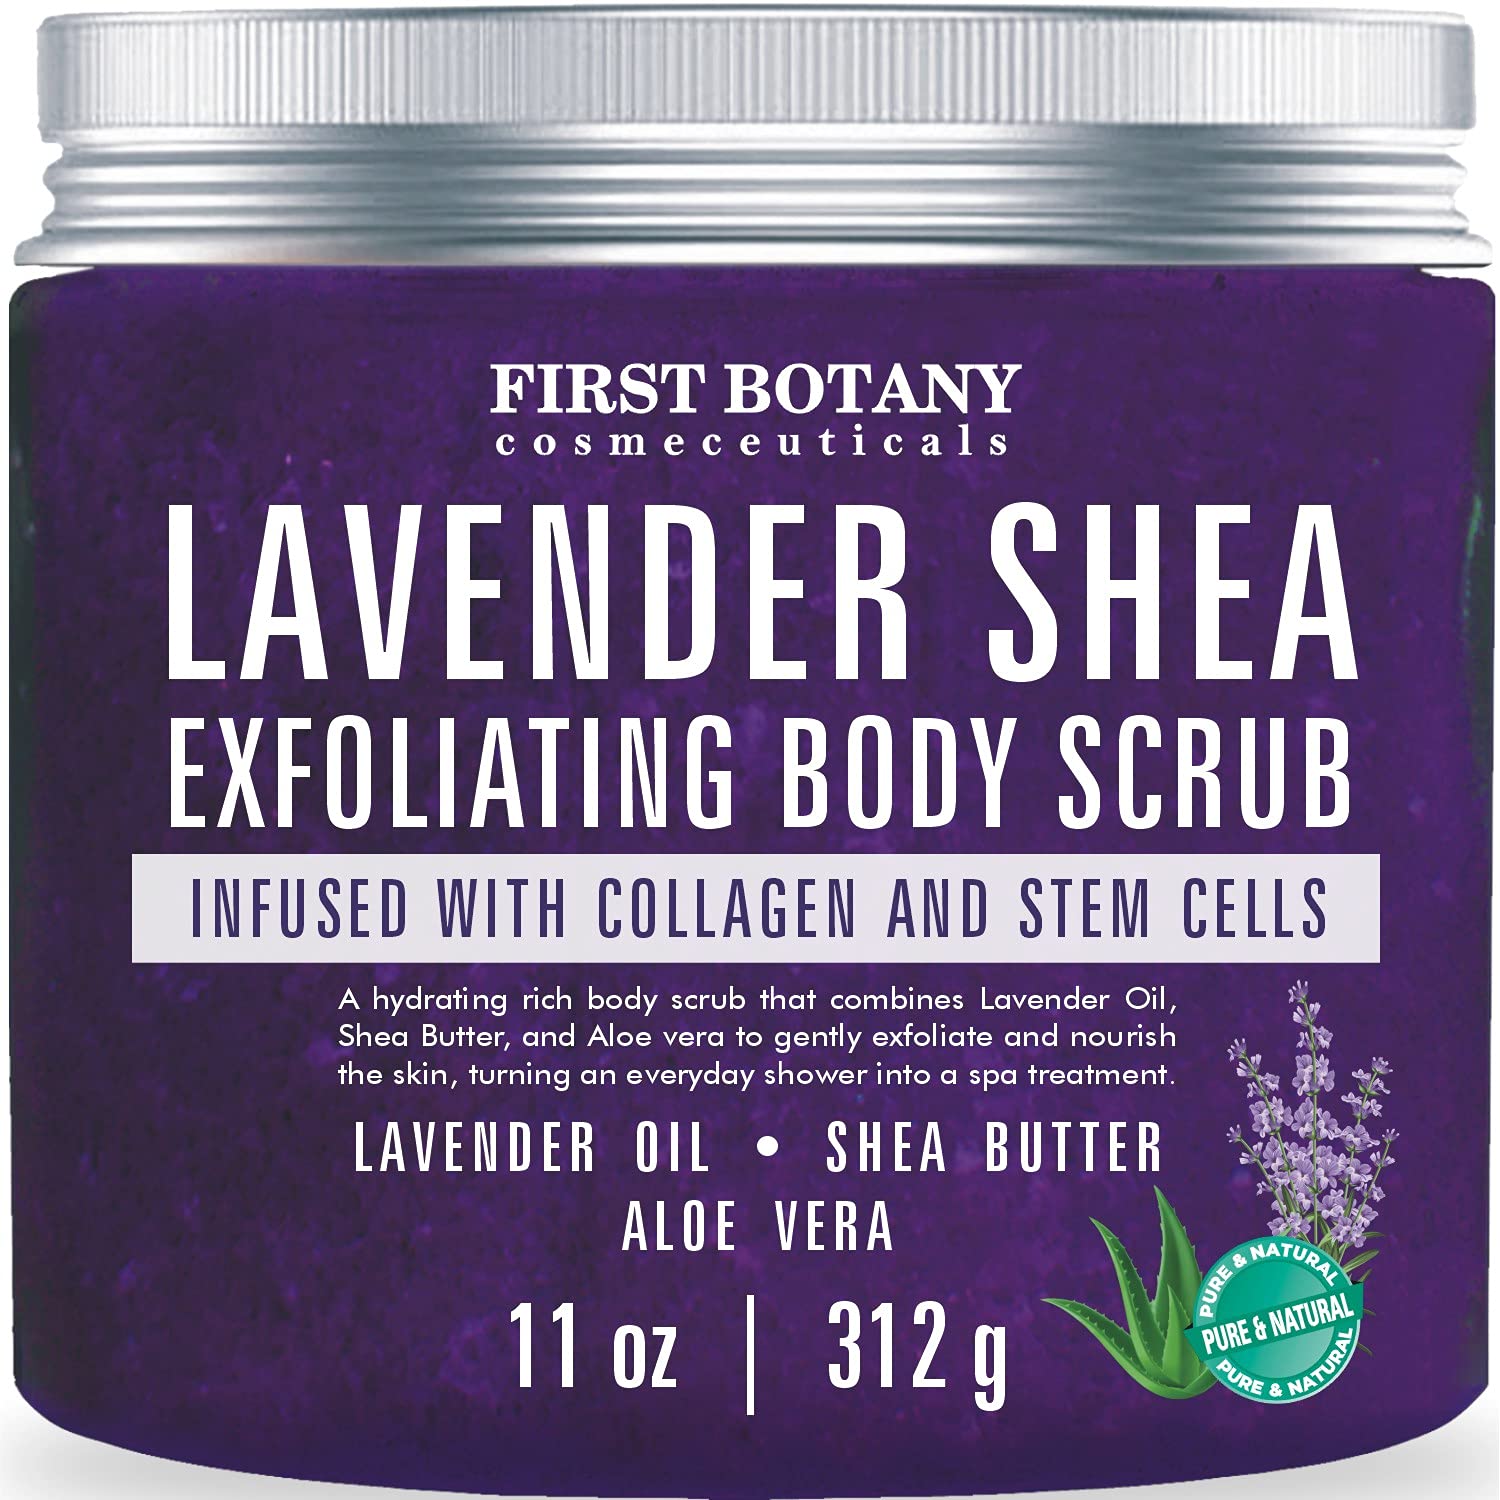 Lavender Oil Body Scrub Exfoliator with Shea Butter, Collagen, Stem Cells, Grapefruit Oil - Natural Exfoliating Salt Scrub & Body and Face Souffle helps with Moisturizing Skin, Acne, Cellulite, Dead Skin Scars, Wrinkles - 11 oz